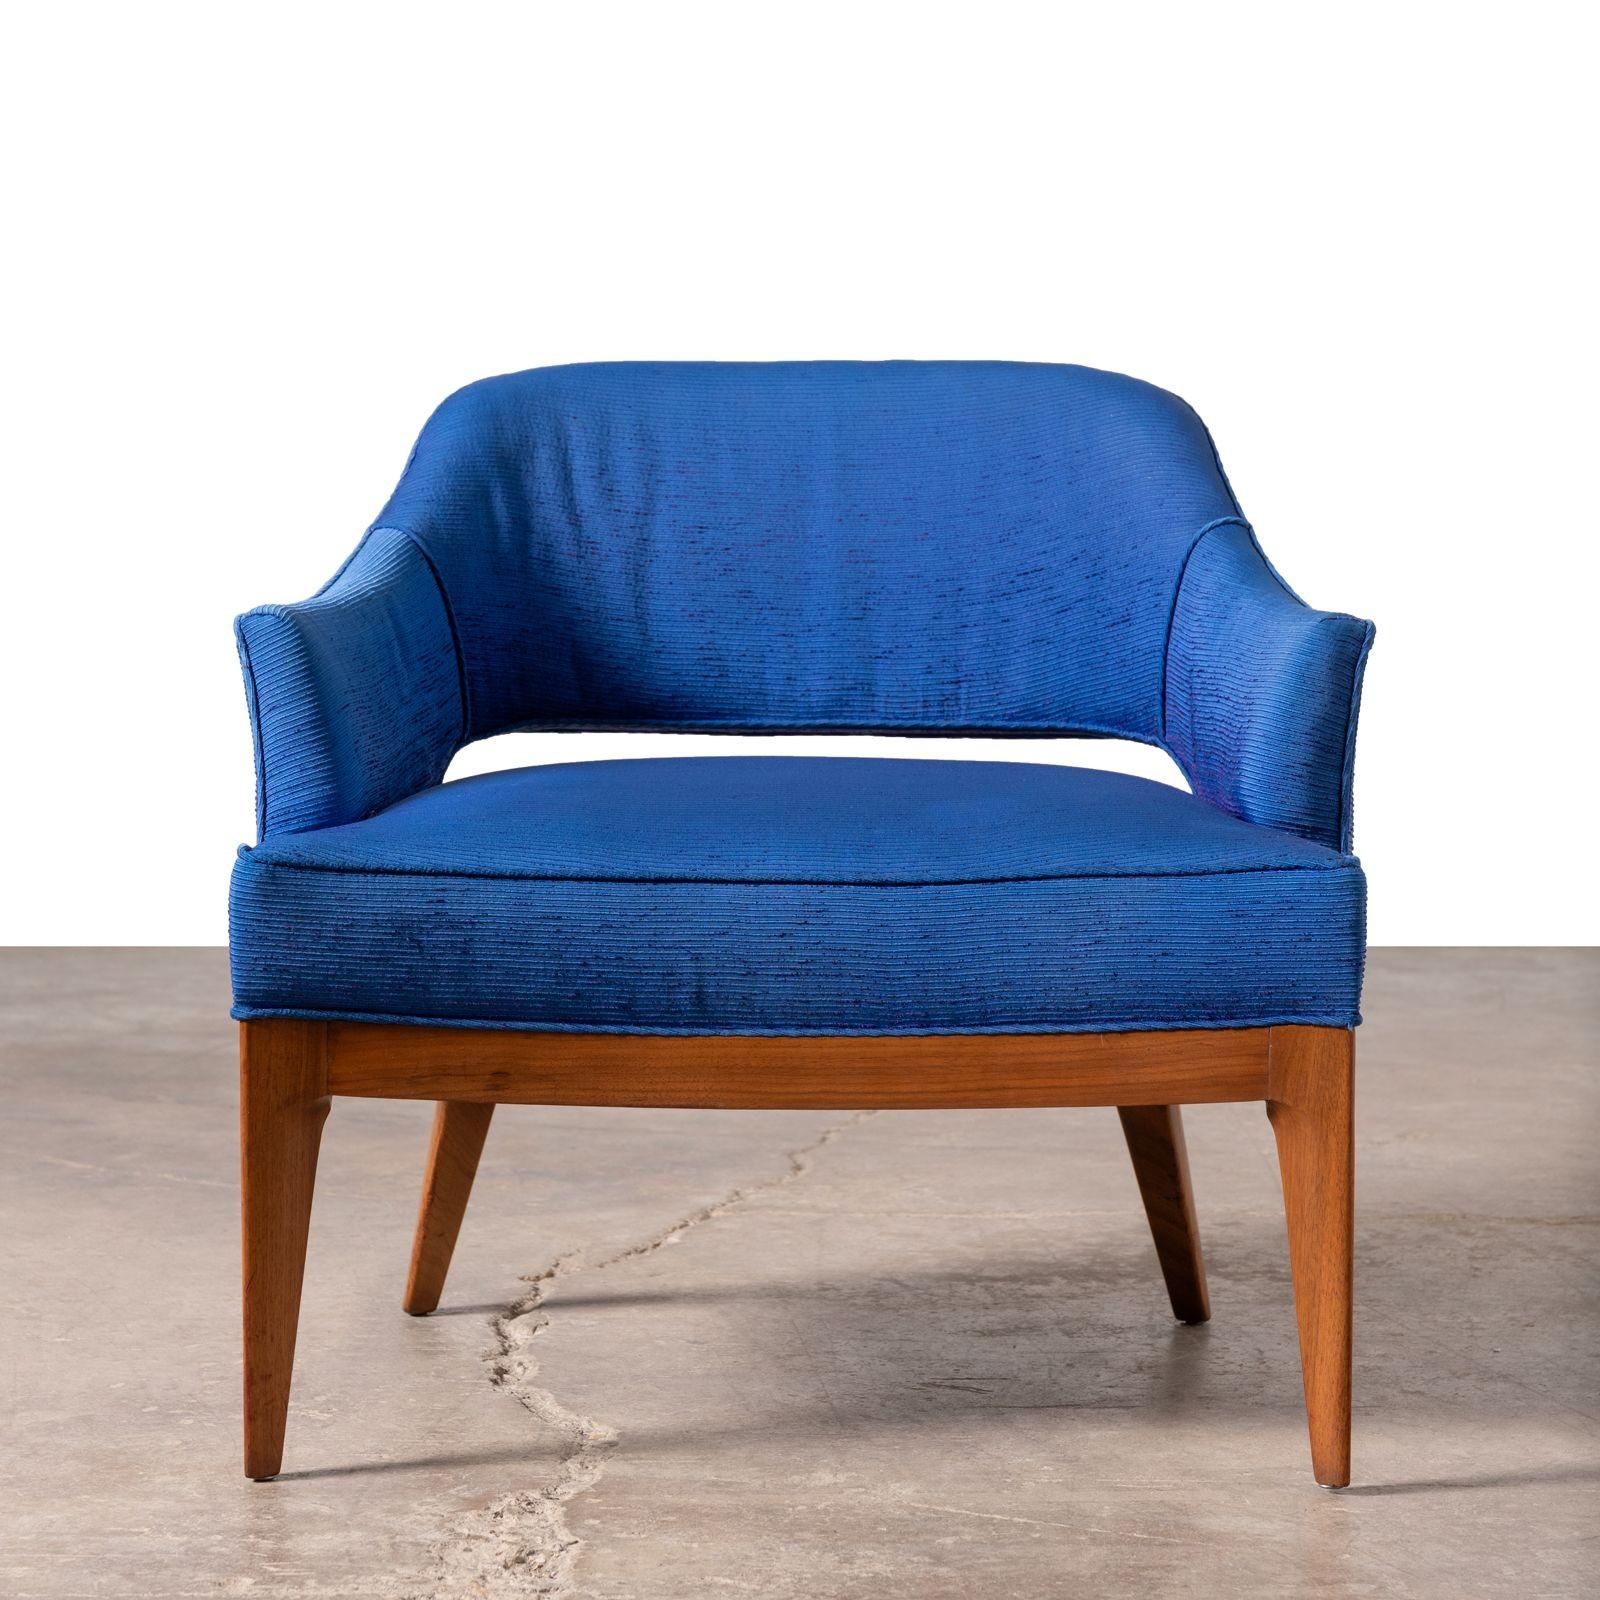 Erwin Lambeth Open Back Lounge Chairs in Raw Blue Silk with Walnut Frames 1960s In Good Condition For Sale In Dallas, TX